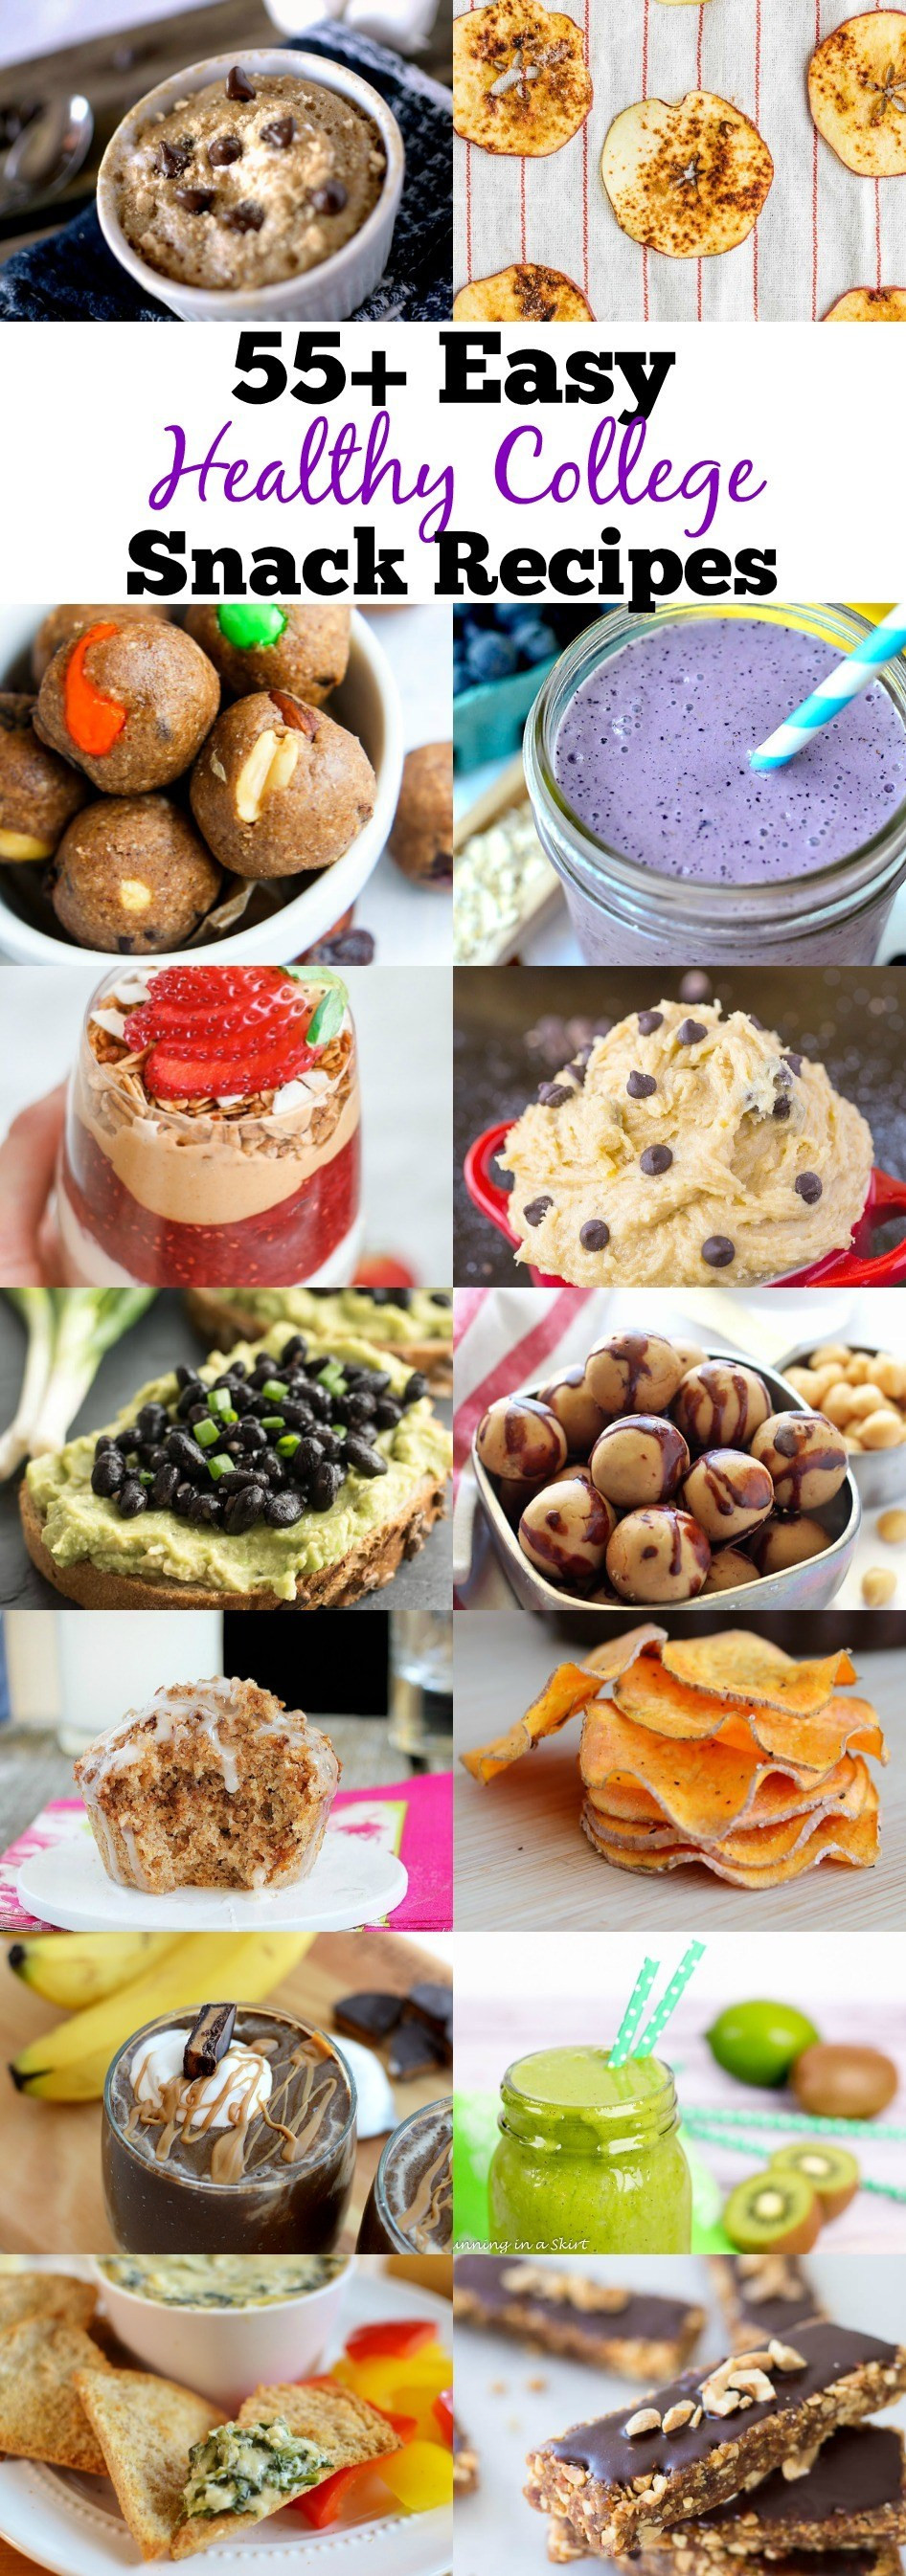 Healthy Snacks For College
 55 Healthy College Snack Recipes That Can Be Made In a